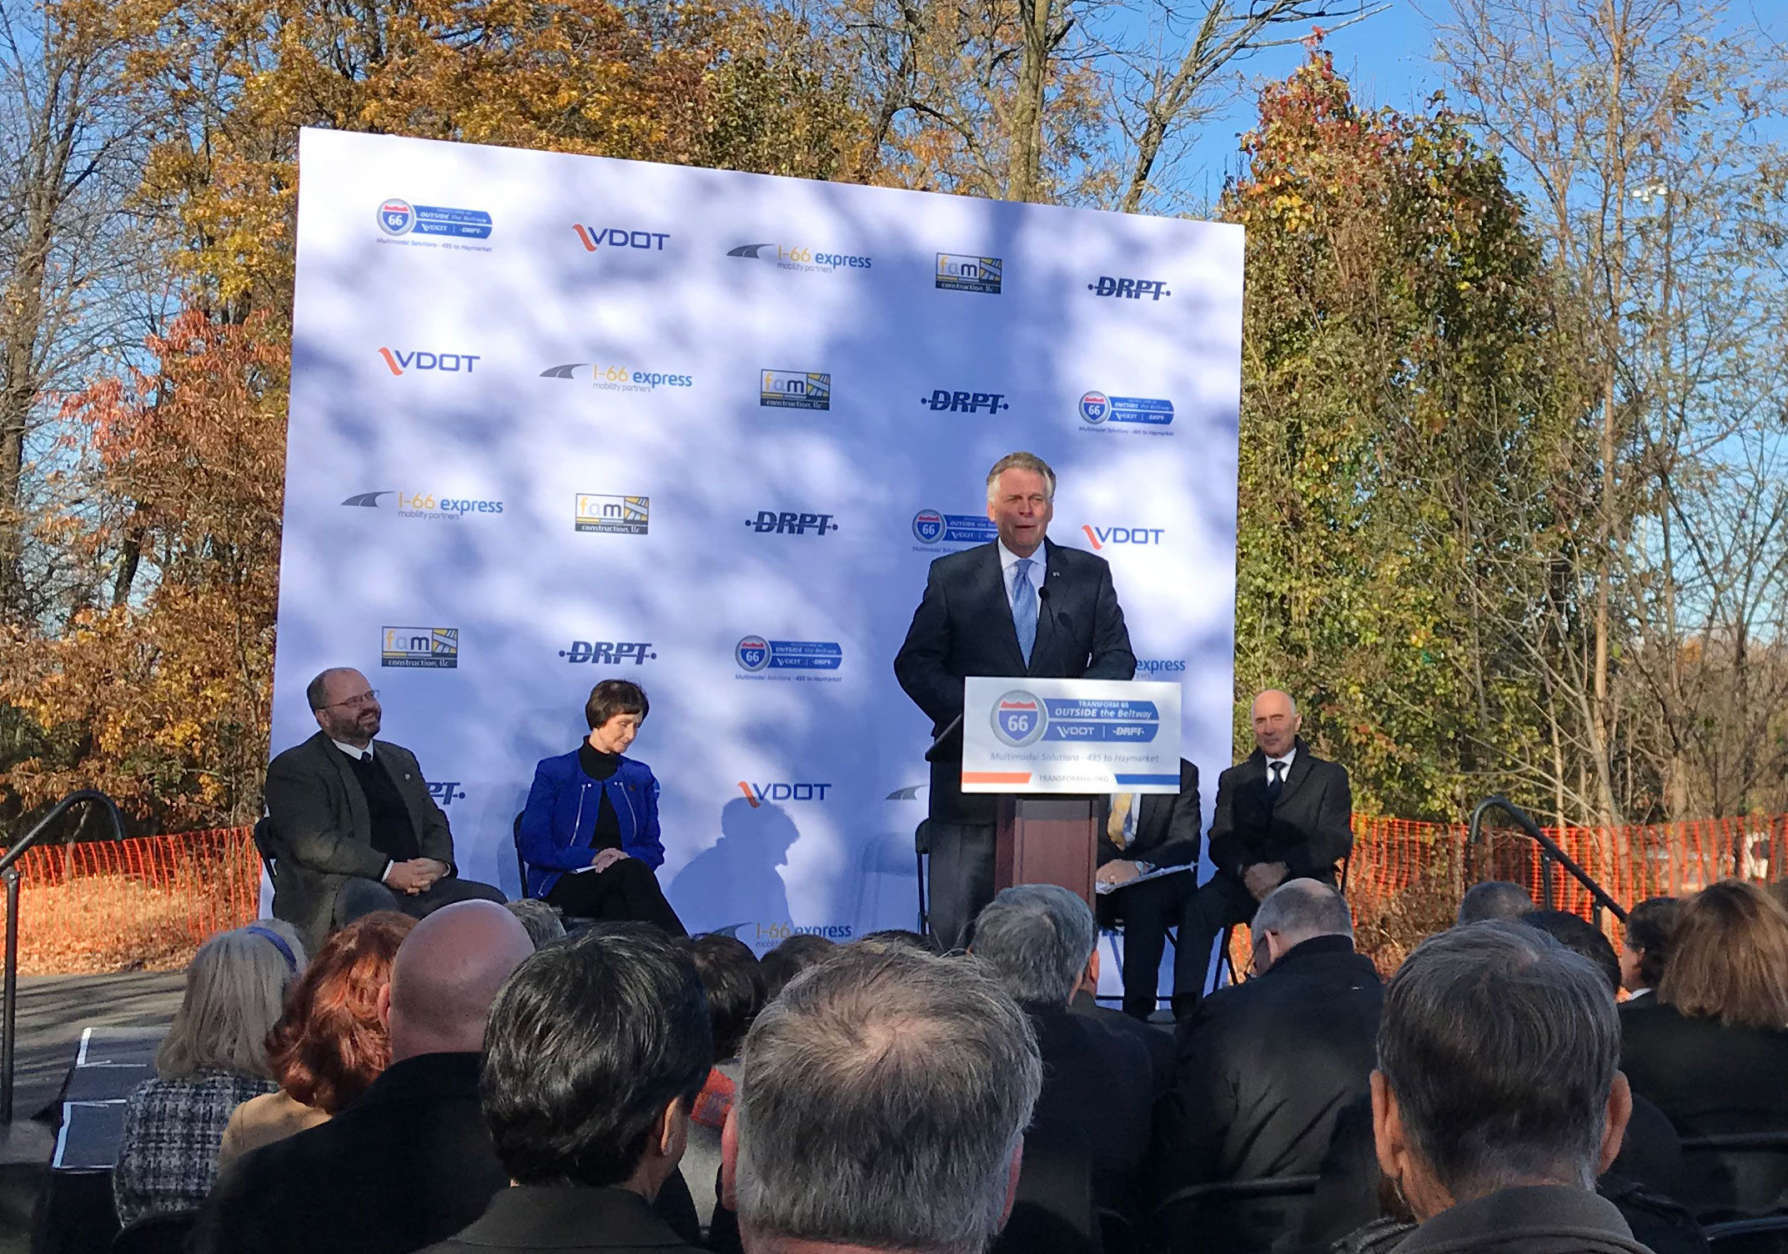 Virginia Gov. Terry McAuliffe addresses the crowd at the groundbreaking. (WTOP/Dick Uliano)